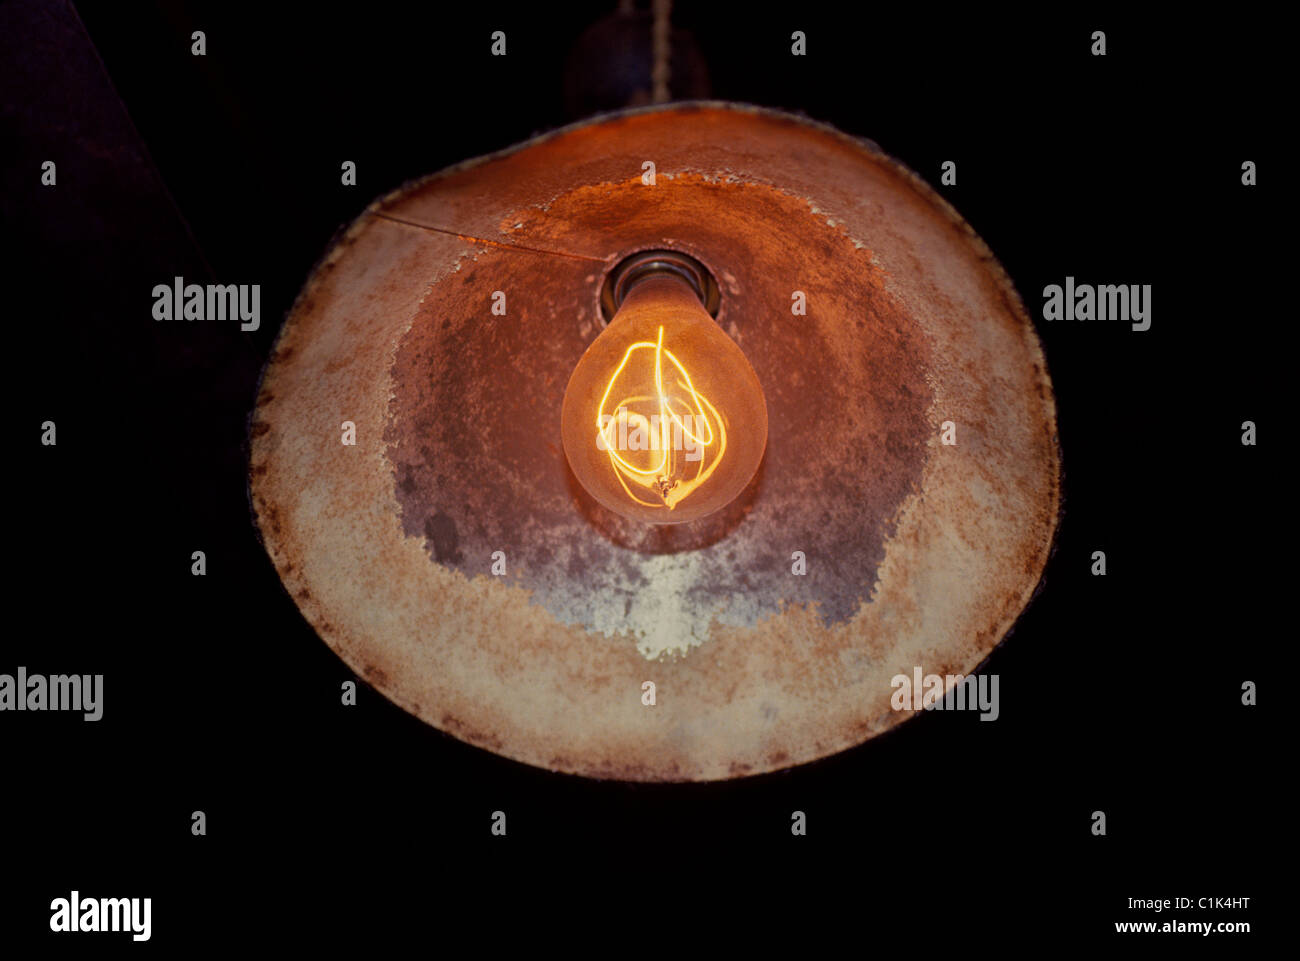 An early incandescent electric light bulb invented by Thomas A. Edison hangs in a vintage light reflector at his laboratory in Fort Myers, Florida. Stock Photo